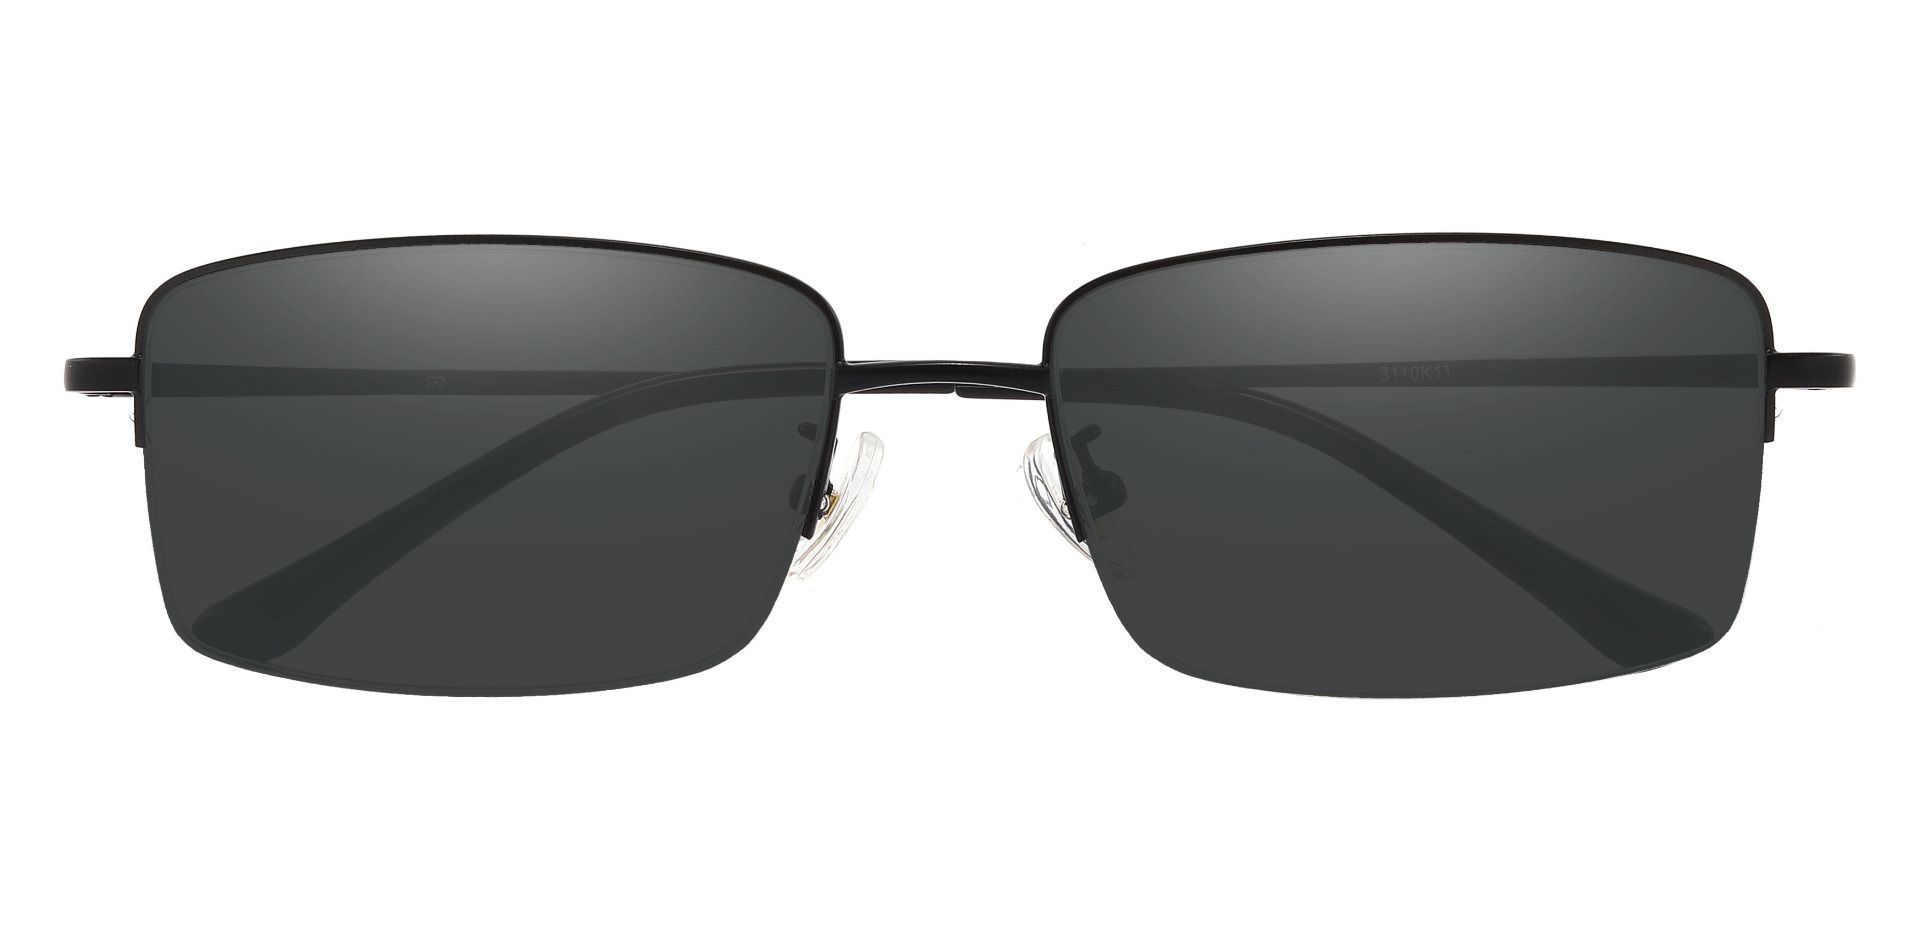 Bellmont Rectangle Non-Rx Sunglasses - Black Frame With Gray Lenses